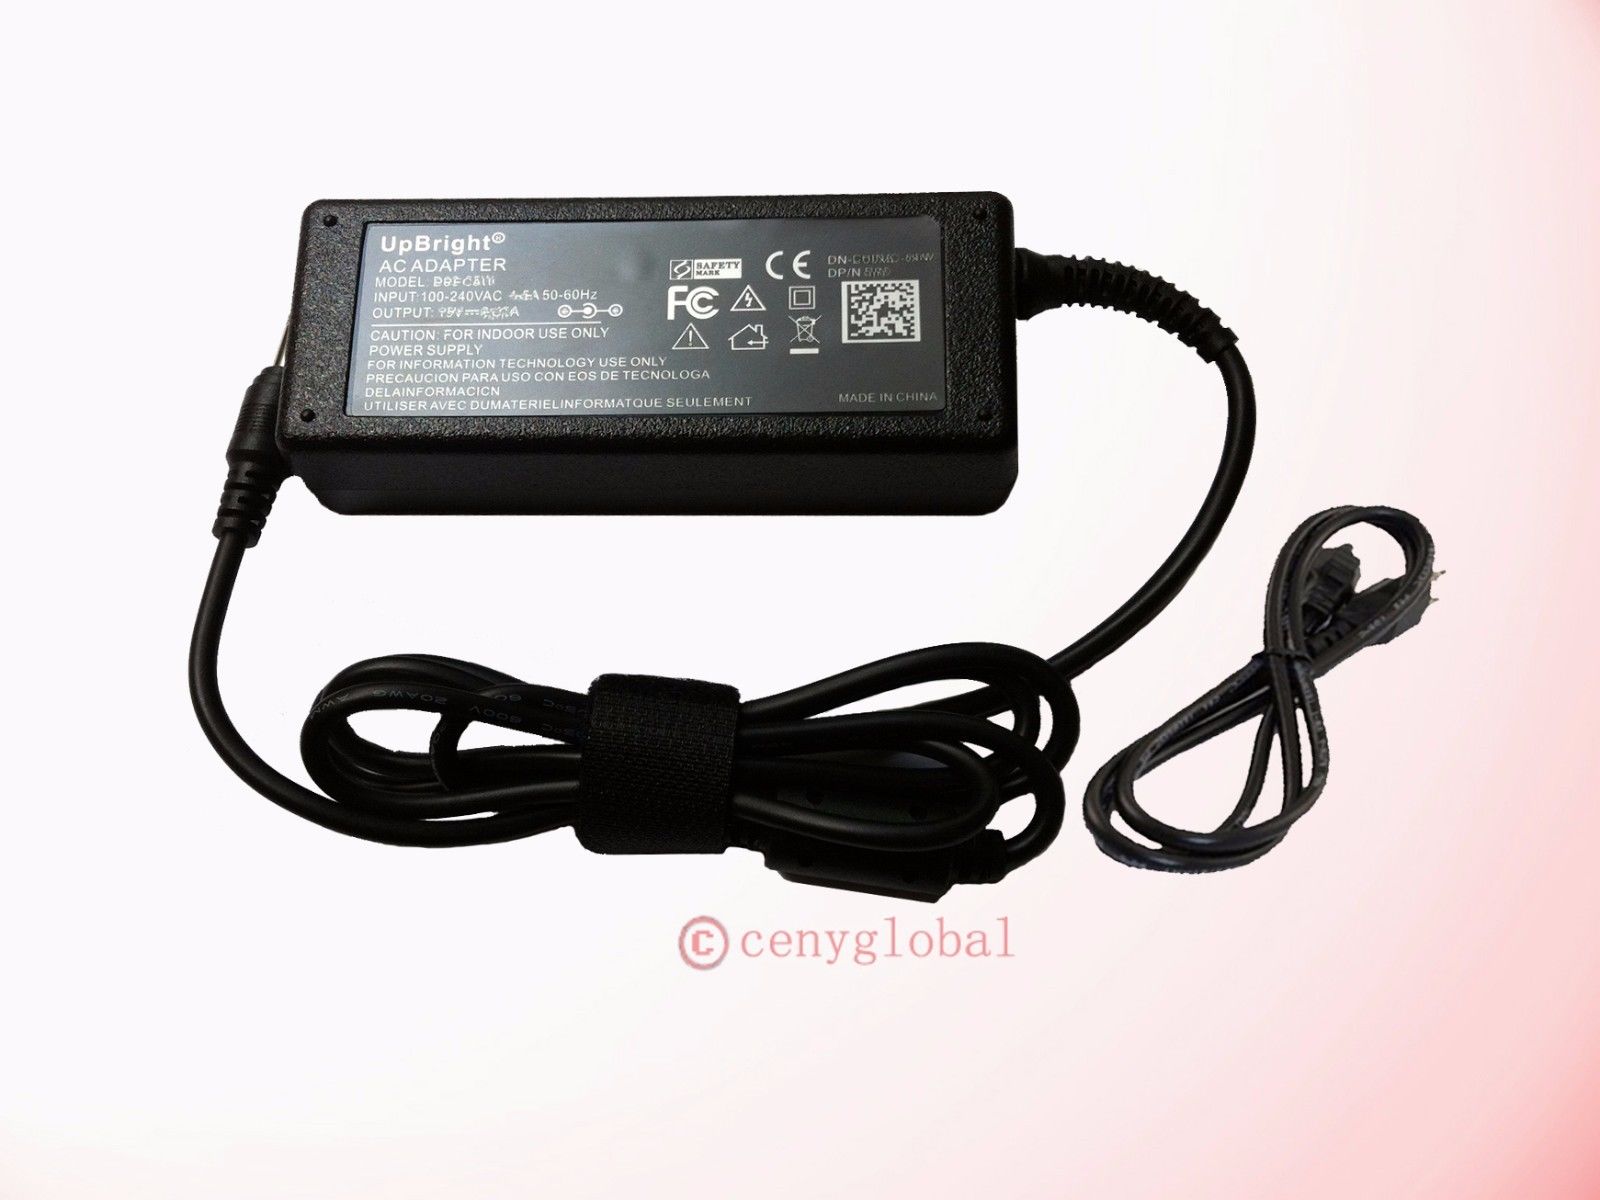 24V LG 26LE5300-UE AUSWLUR ZENITH LCD LED TV Power Supply Cord NEW